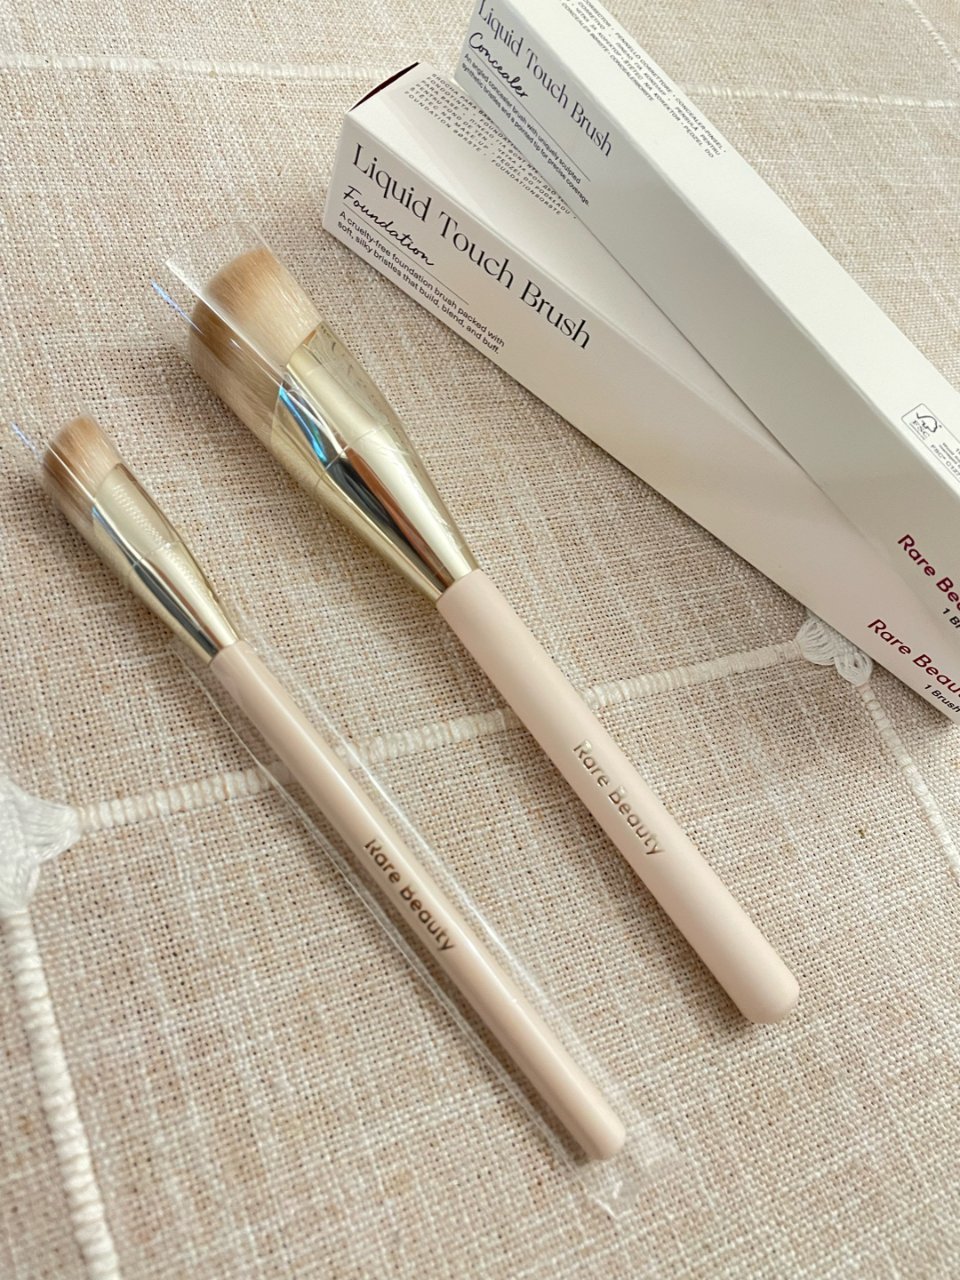 Rare Beauty Liquid Touch Concealer Brush | Space NK,Rare Beauty Liquid Touch Foundation Brush | Space NK